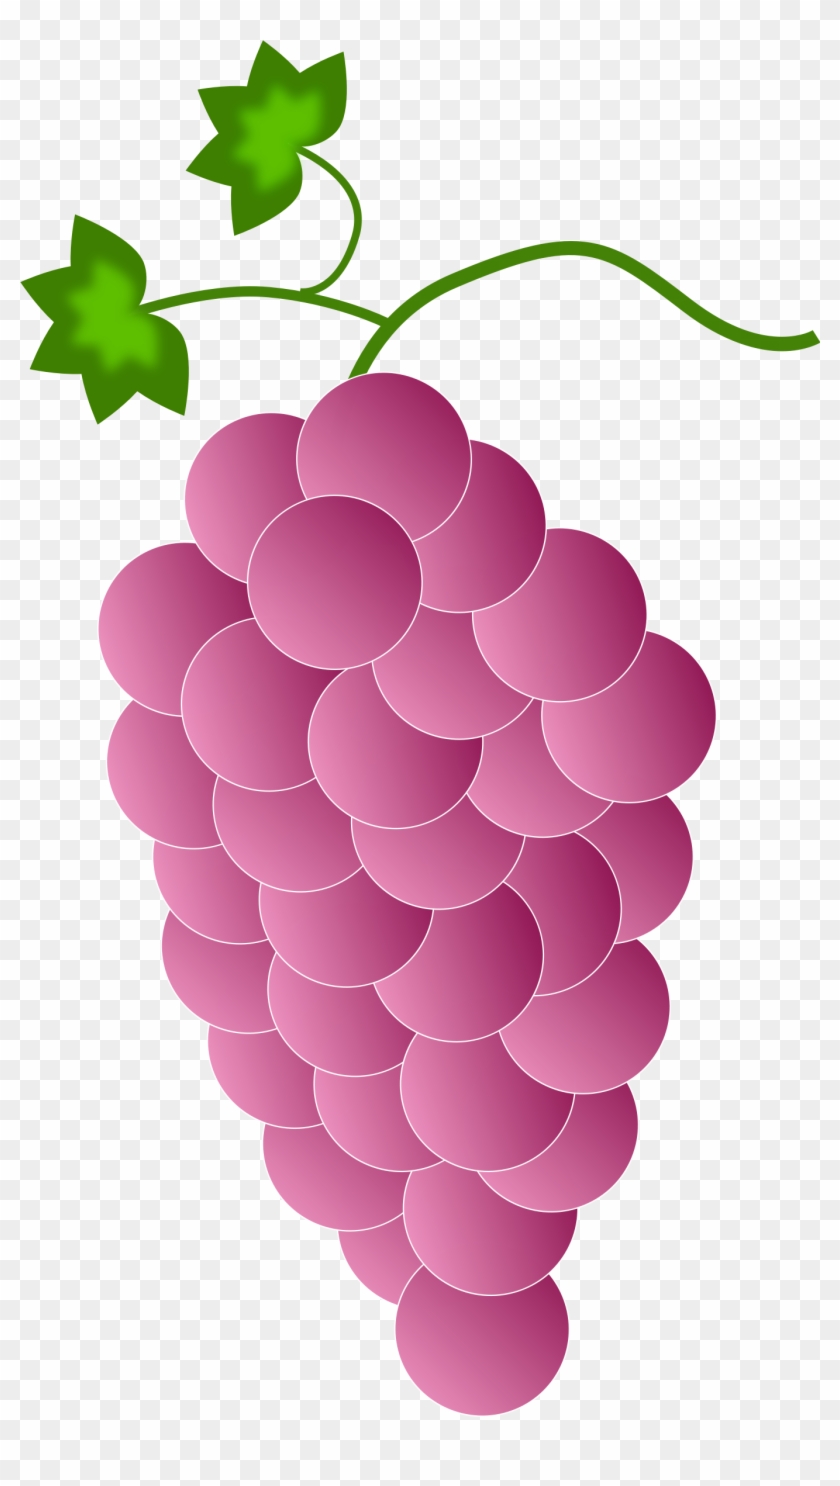 This Free Icons Png Design Of Pink Grapes Clipart #496549